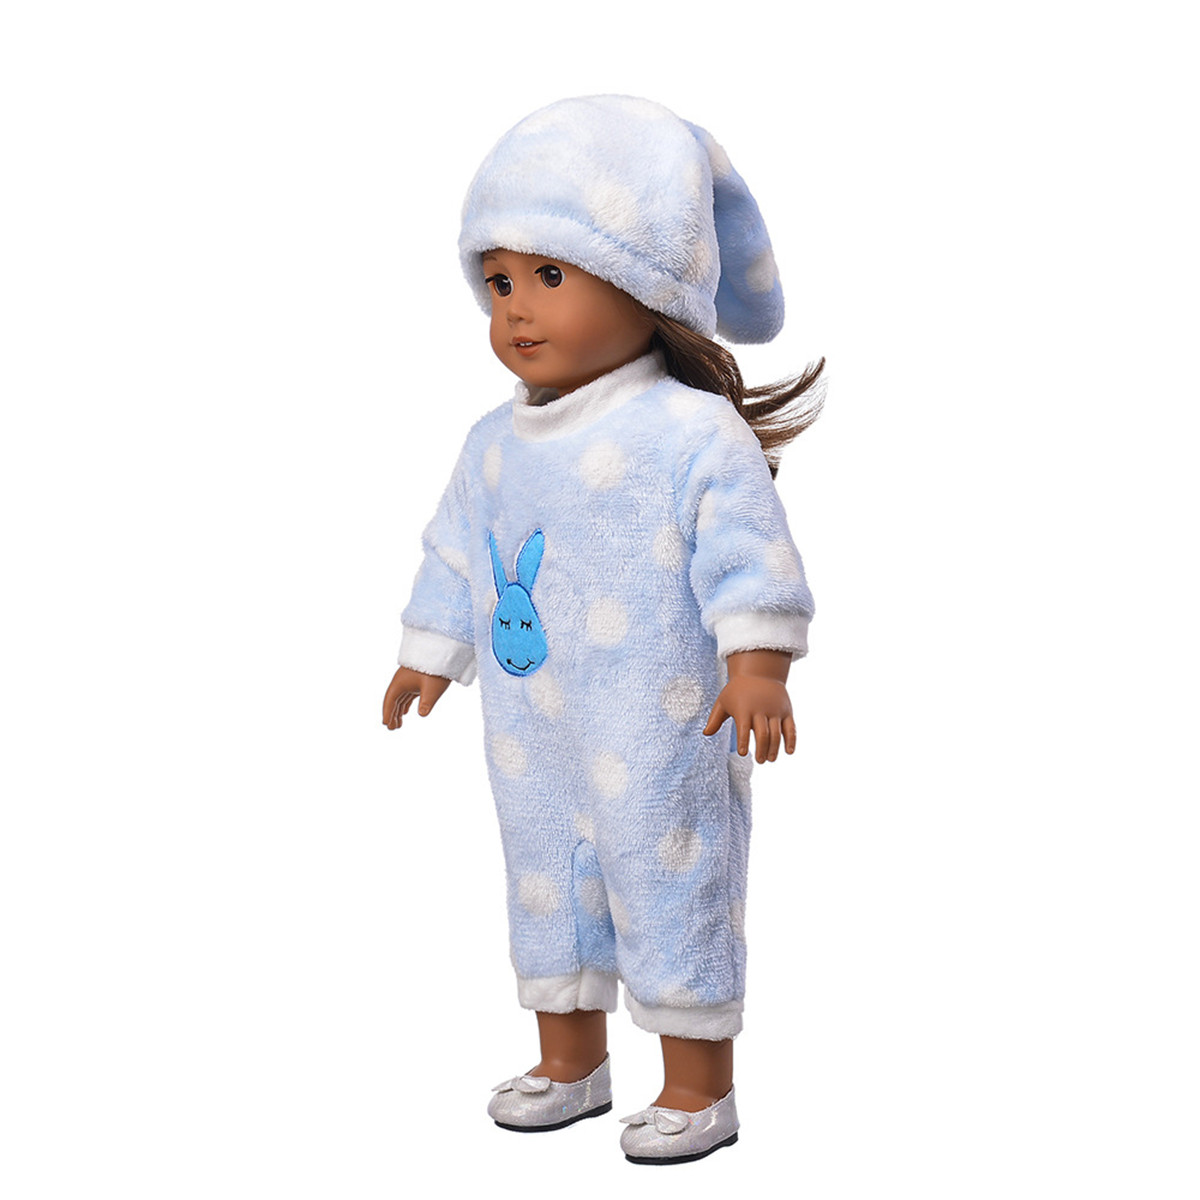 Dolls-Pajamas-Sleeping-Clothes-Fit-For-Doll-Jumpsuit-Suit-With-Cute-Hat-18inch-Kids-Birthday-Gift-1344738